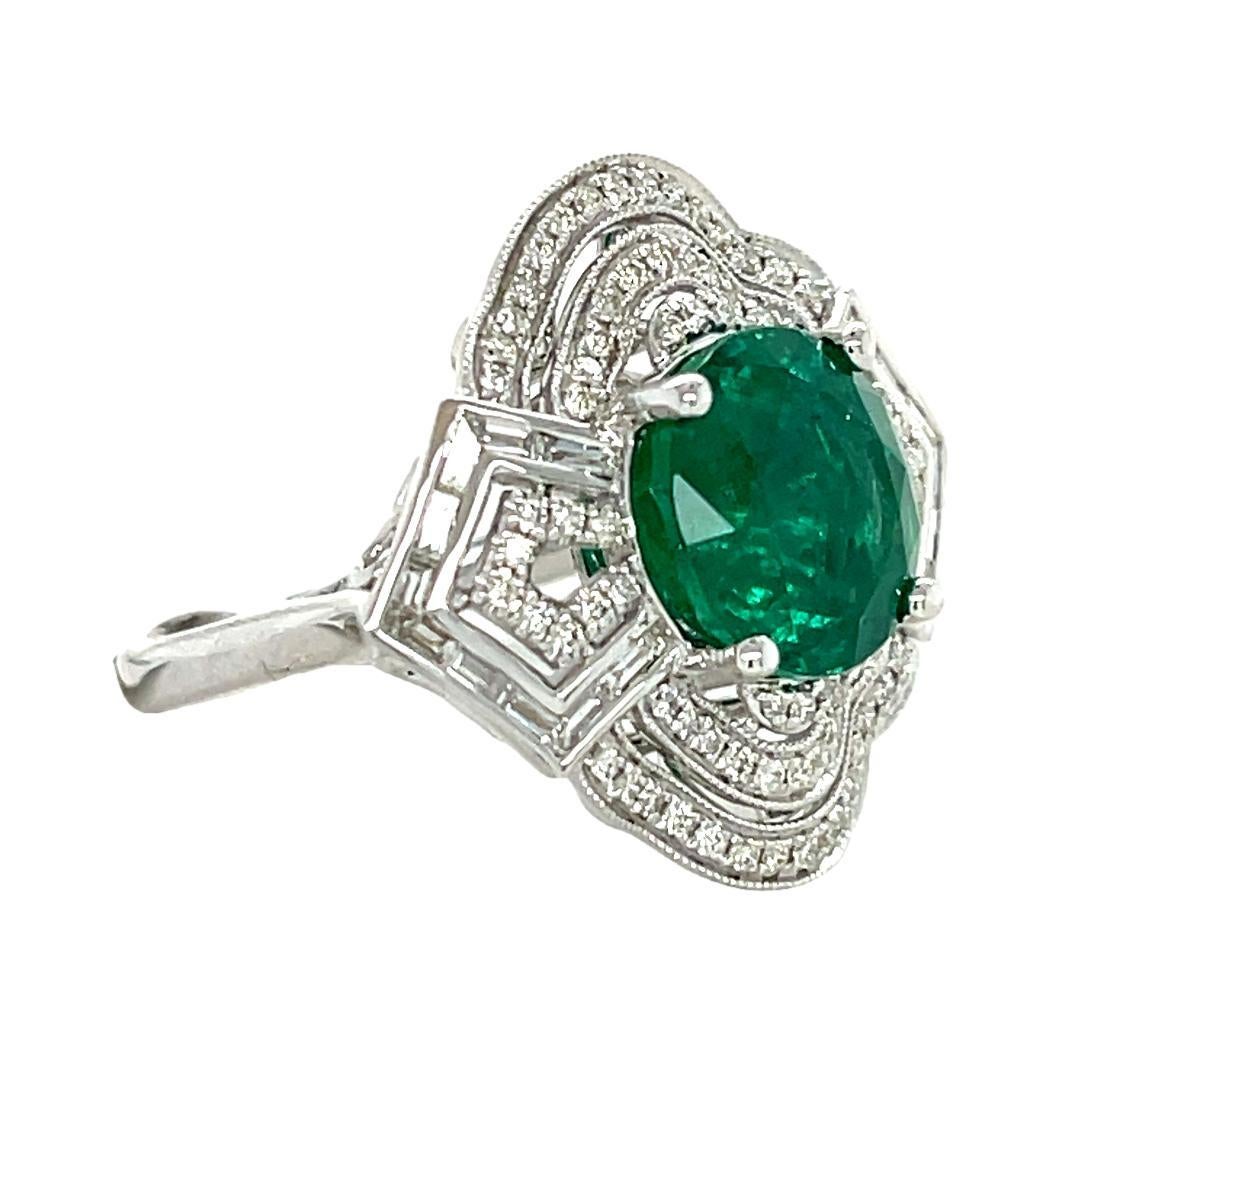 This beautiful Statement ring has a 10 mm round Zambian Emerald with 4 prong setting in 14 karat white gold. There are top quality sparkling baguette and brilliant cut round diamonds surrounding the center piece for added elegance. This beautiful